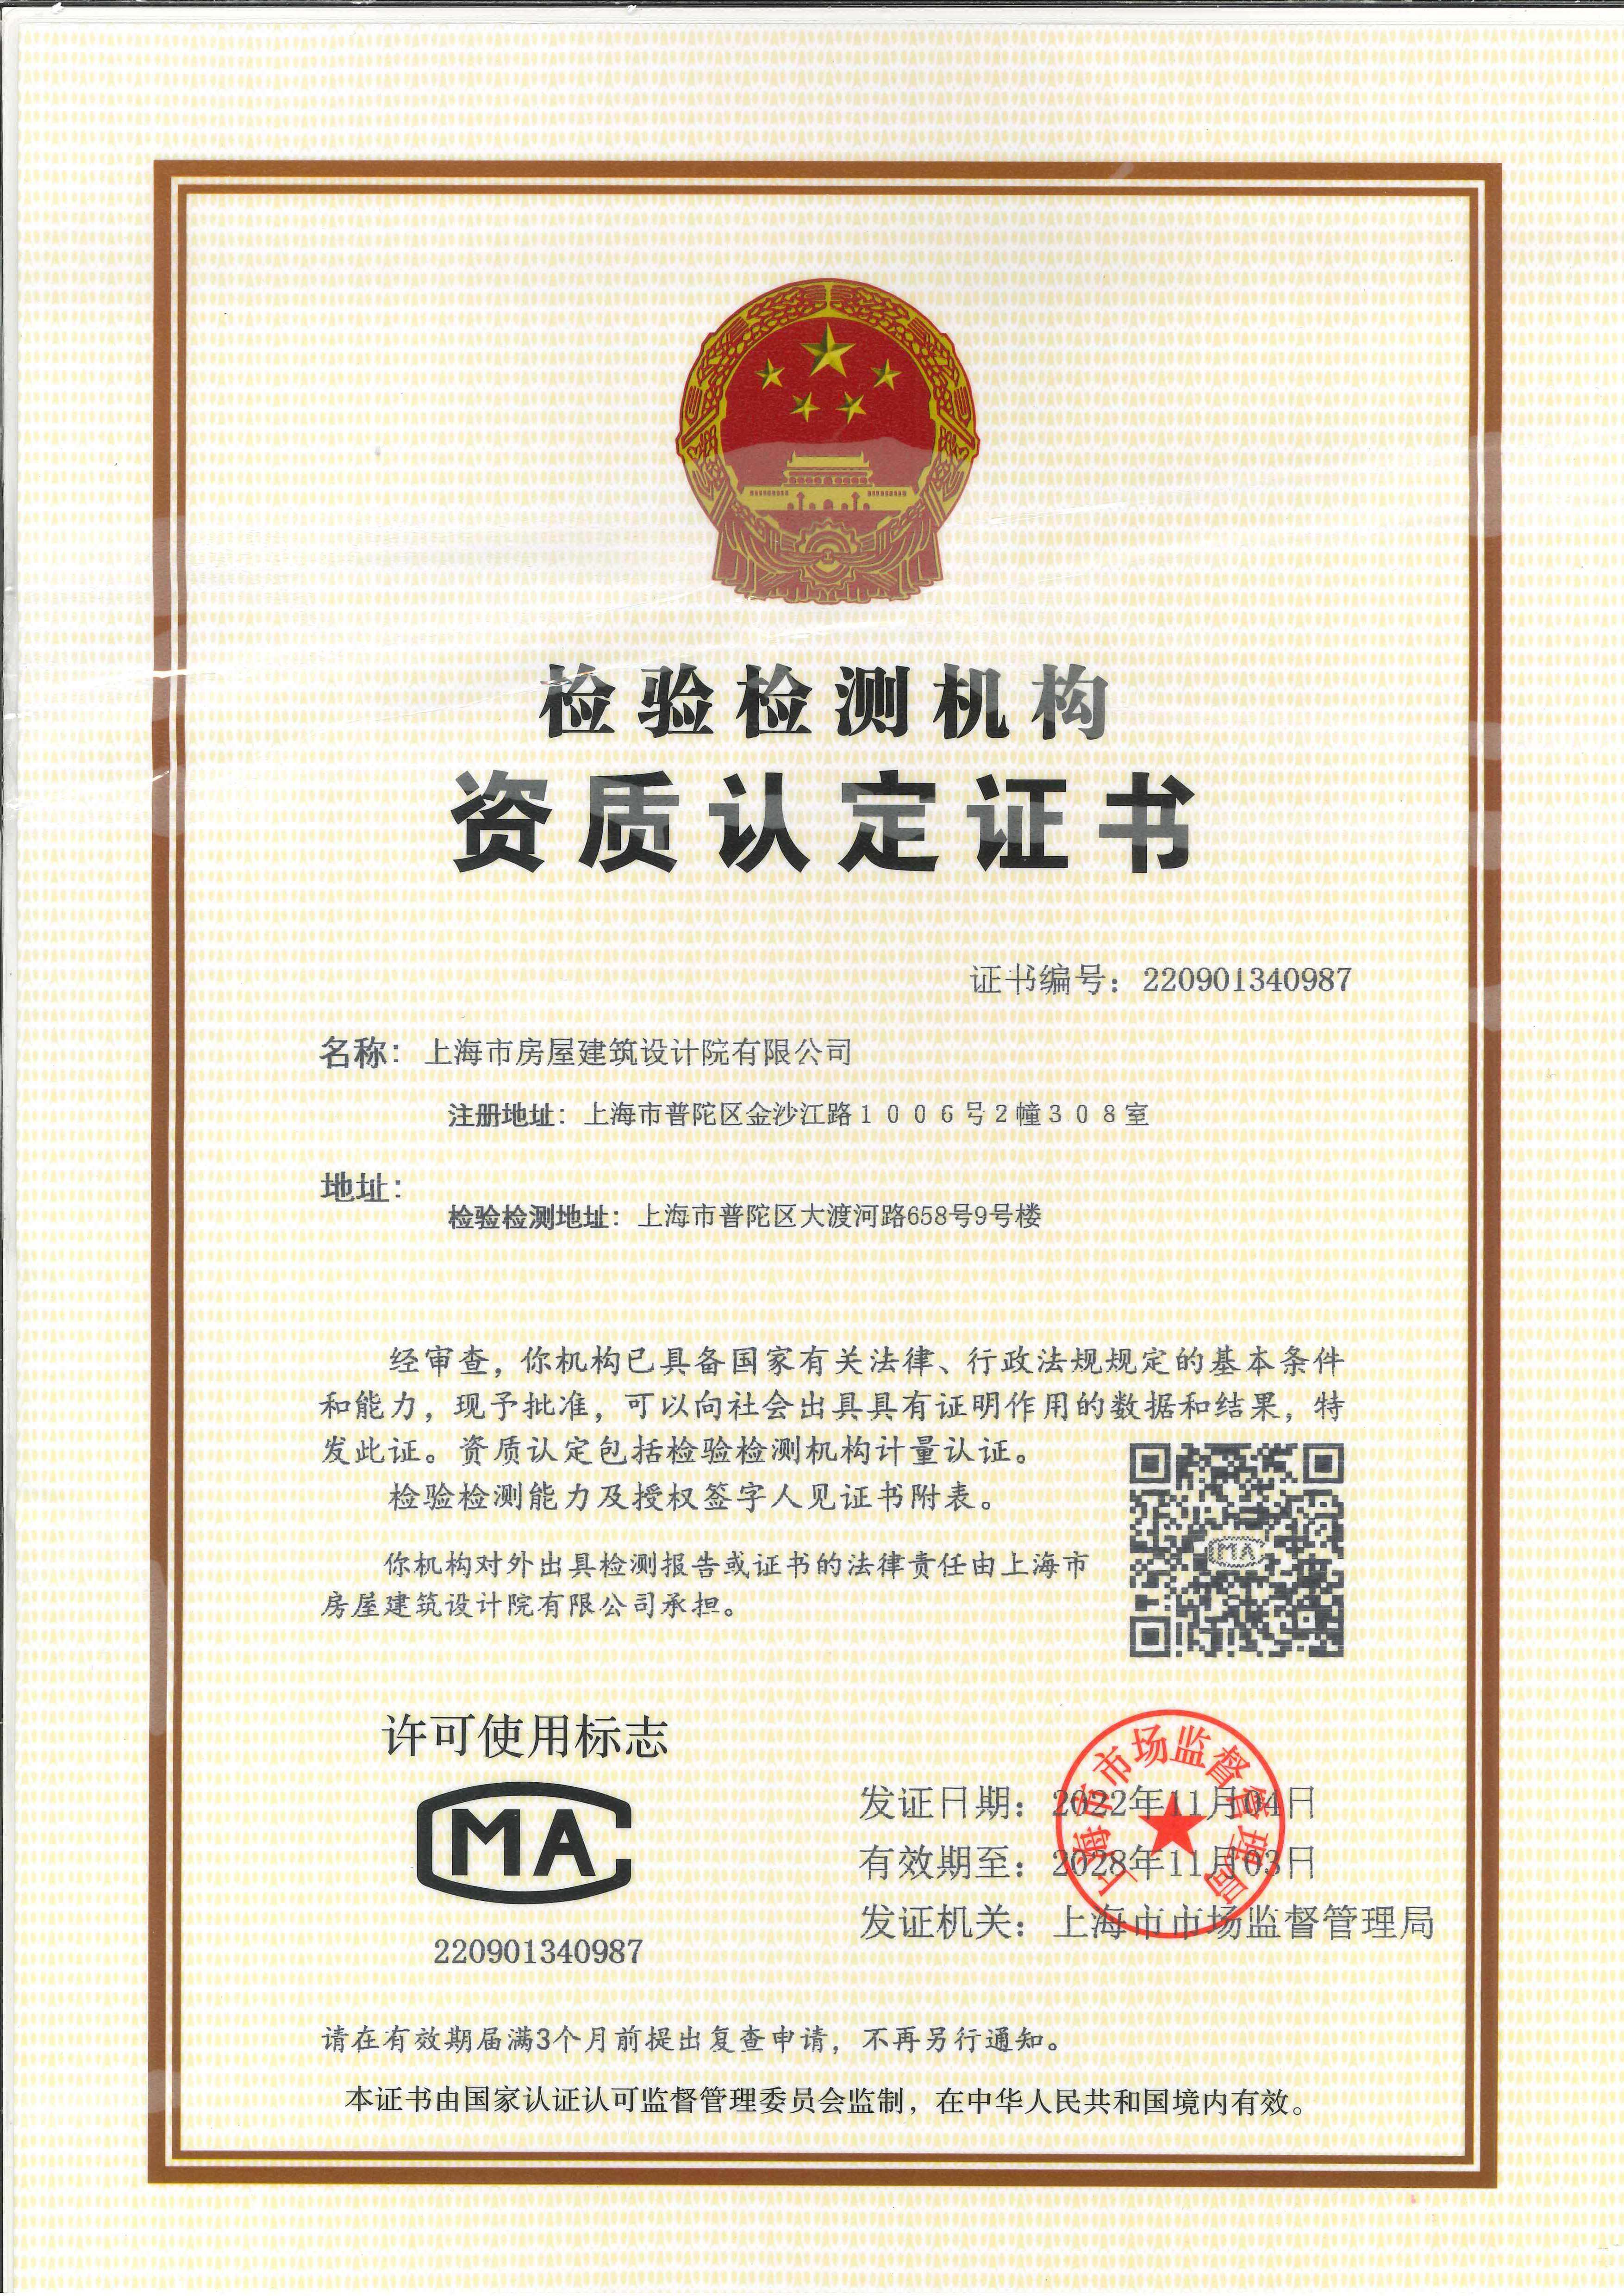 Qualification identification certificate for inspection and testing agency